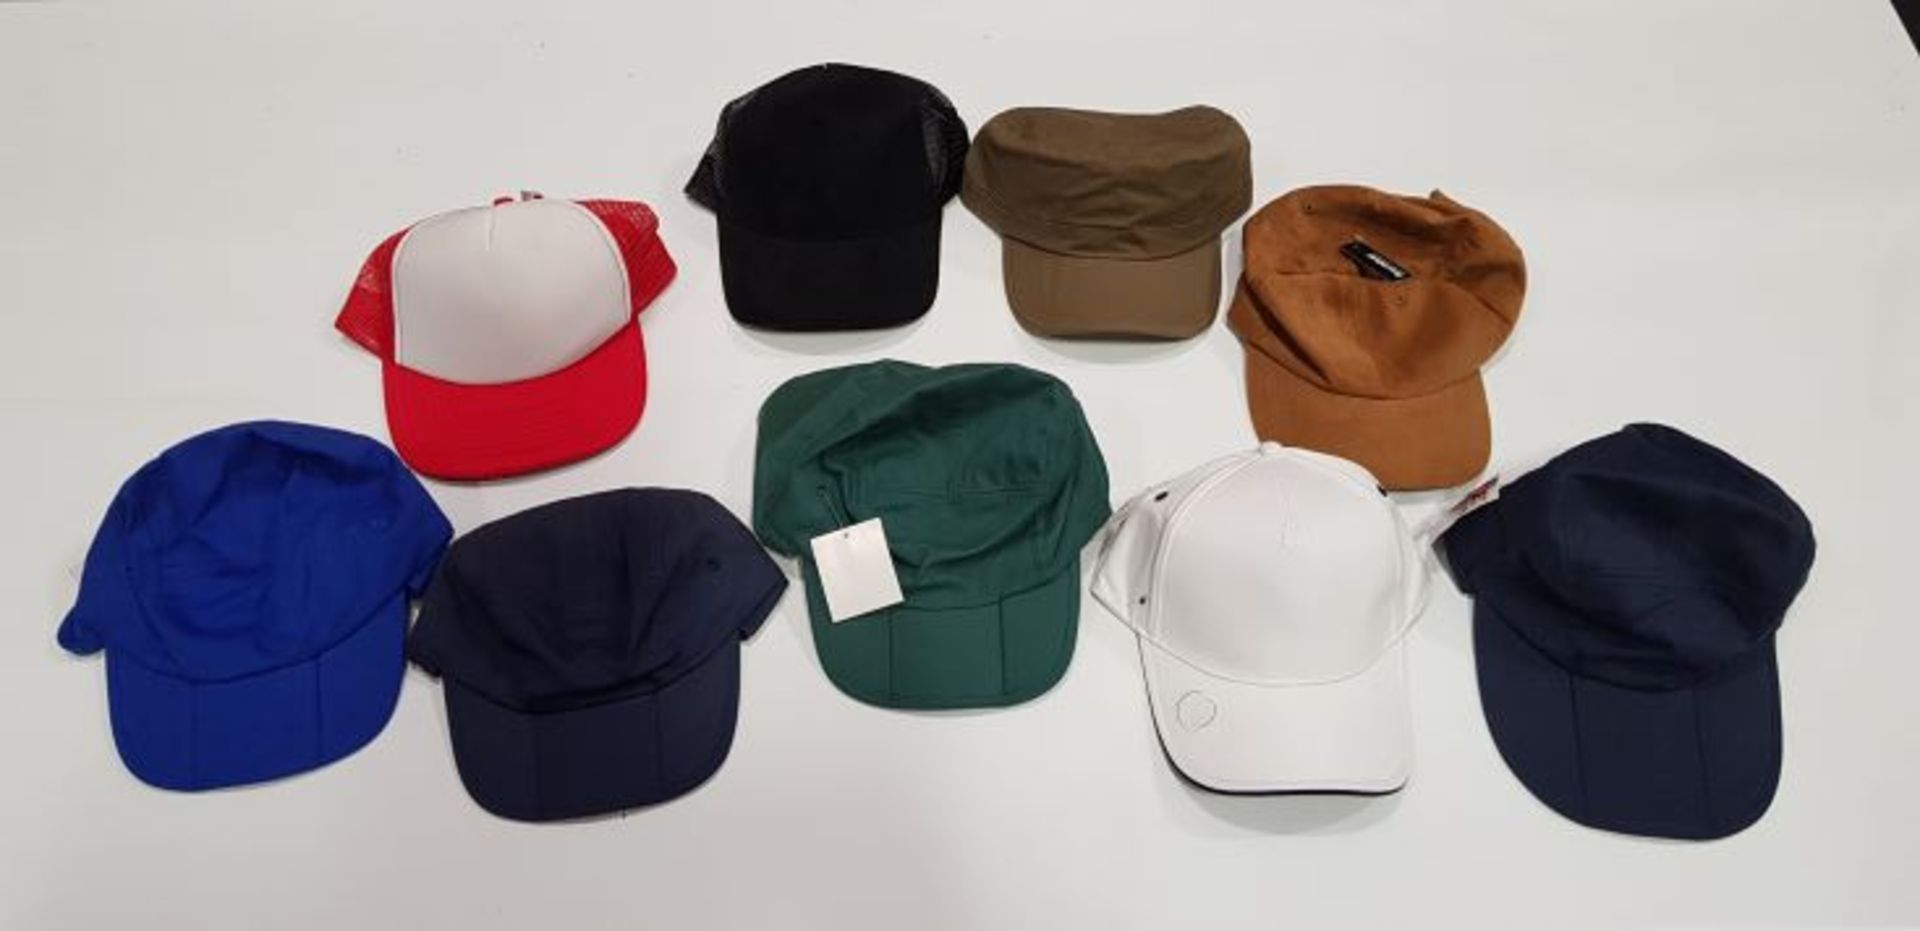 38 PIECE MIXED CLOTHING LOT CONTAINING RESUIT HEADWEAR HAT, BEECHFIELD HATS IN VARIOUS COLOURS